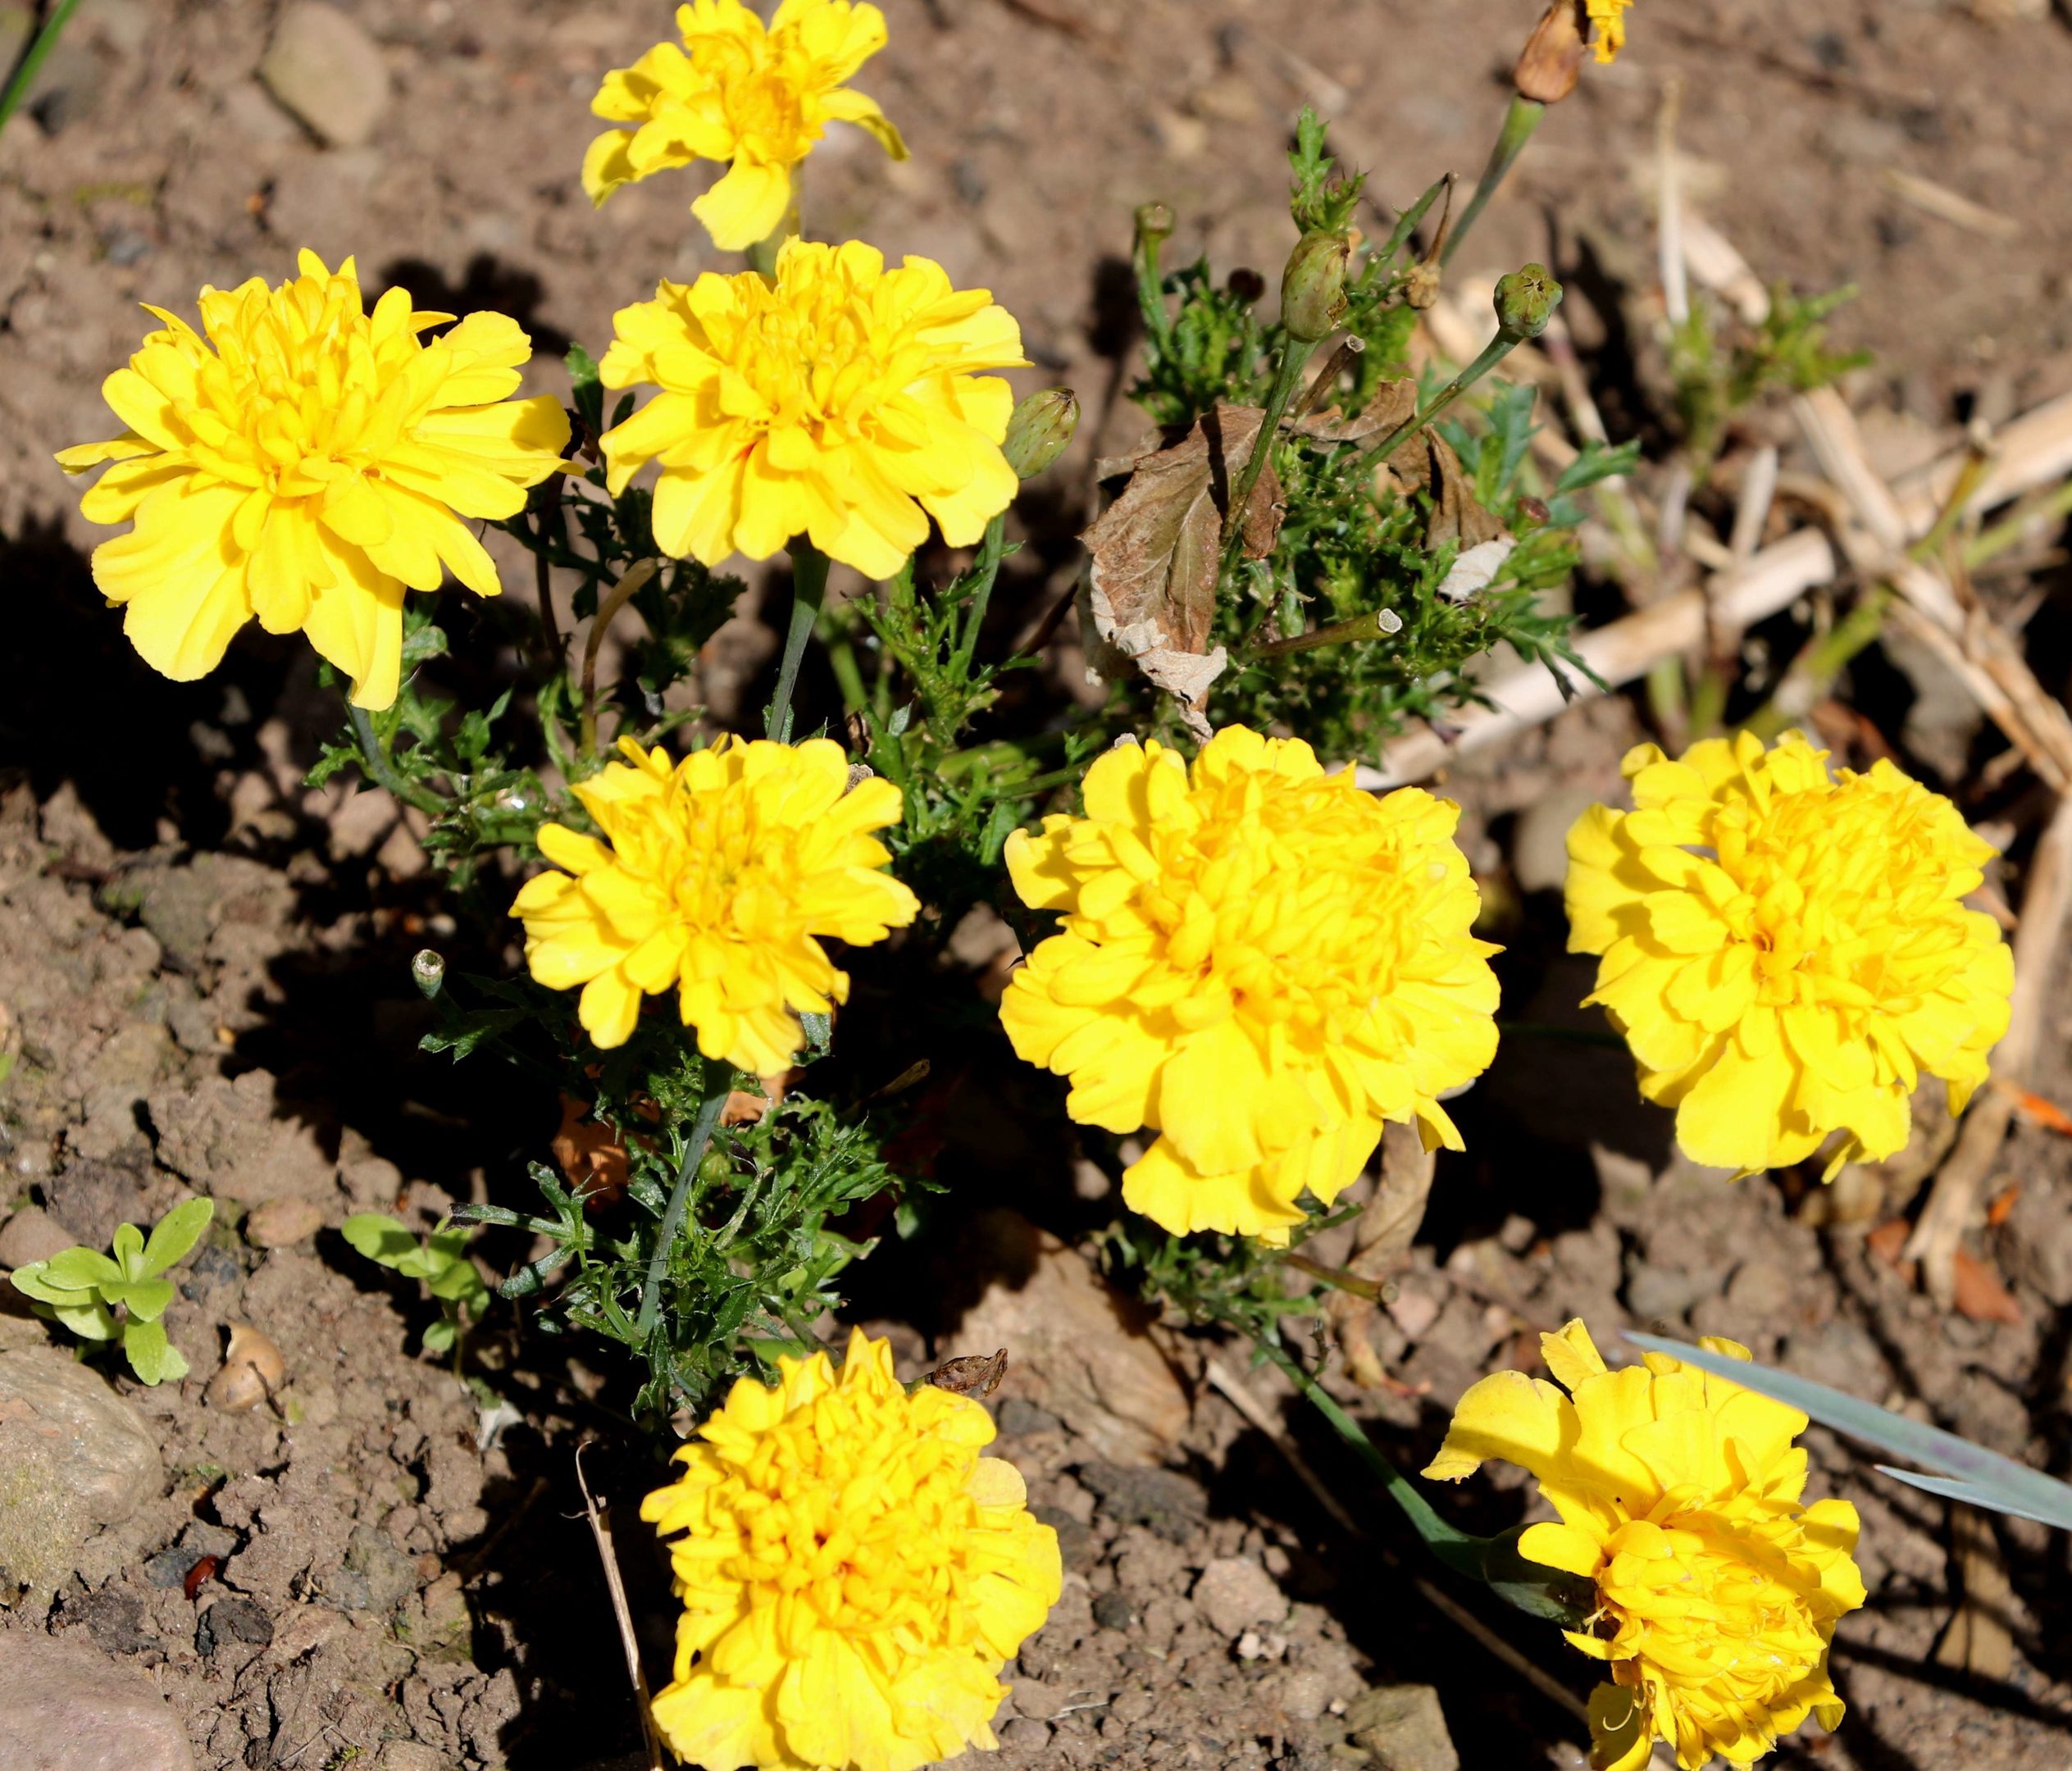 French marigolds in October